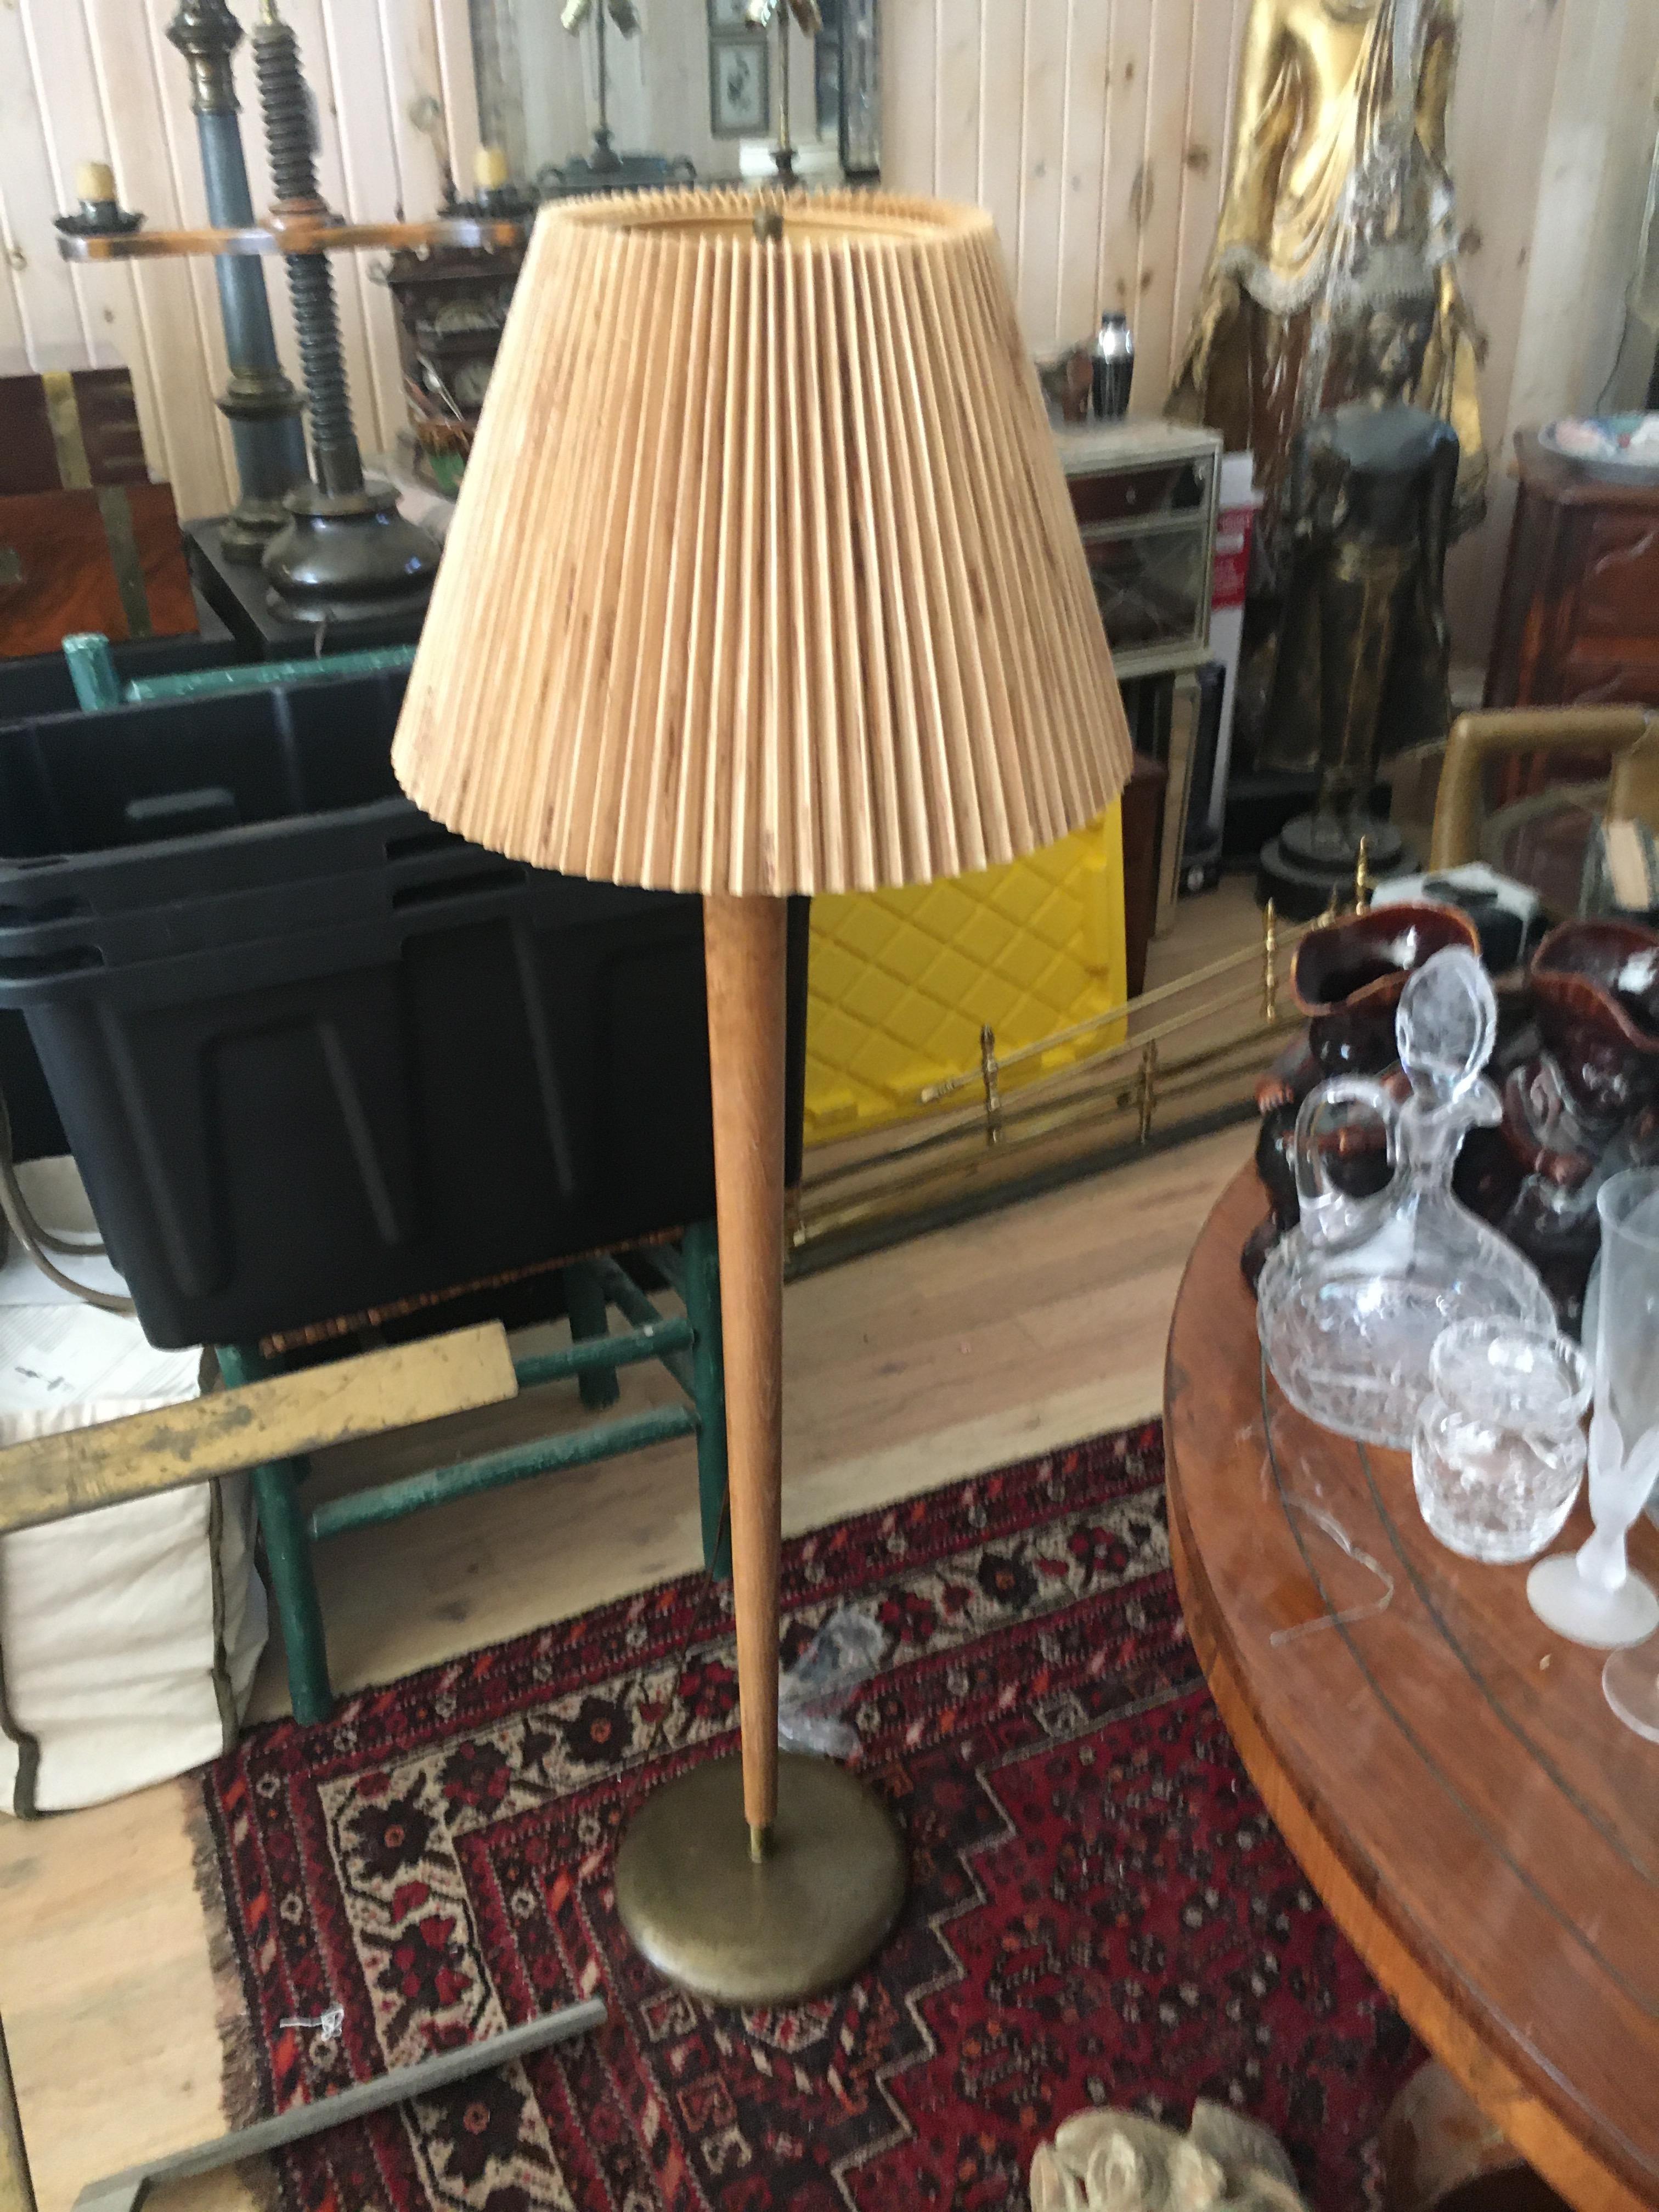 Spectacular Midcentury Teak and Brass Floor Lamp, Nice Clean Lines and Patina In Good Condition For Sale In Buchanan, MI